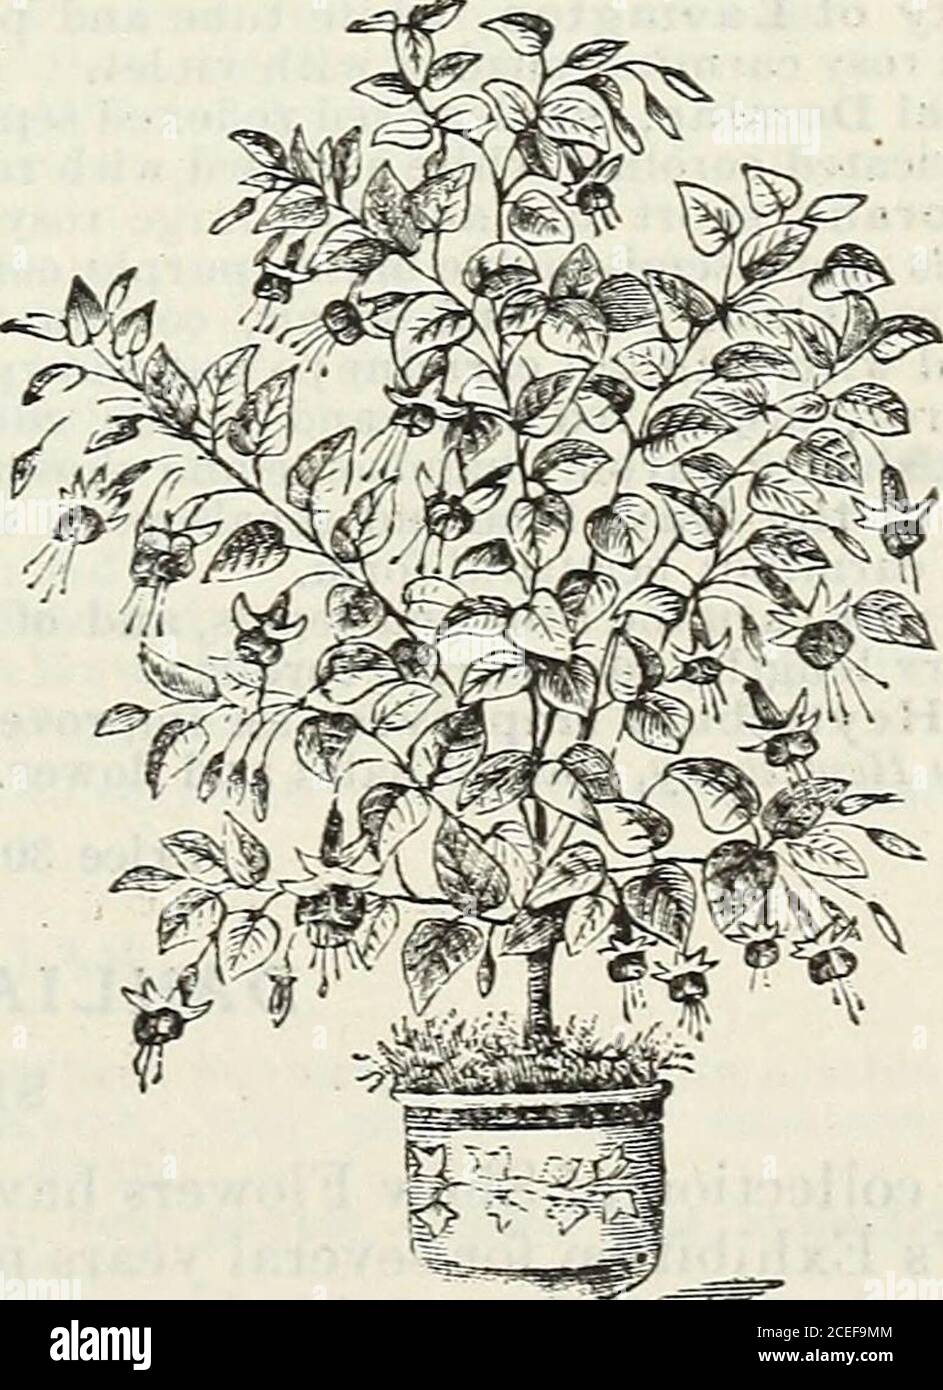 . John Saul's Washington nurseries catalogue of plants for the spring of 1888. olet-blue. Elm City {d), corolla forming rich crimson balls,very good. Earl of Beaconsfield, the blooms are three inchesin length, the tube and sepals are of a light rosy-carmine, corolla deep carmine. Fairy Queen, tube and sepals white, the latter re-curved corolla rosy-carmine. Flambeau, short tube, reflexed sepals crimson; cor-olla of a dark violet, striped with scarlet. Flo^on de Neige, well reflexed carmine sepals,large white corolla. 2o cts. Francis Desbois (rf), red sepals, violet-purple andcorolla. Frau Emma Stock Photo